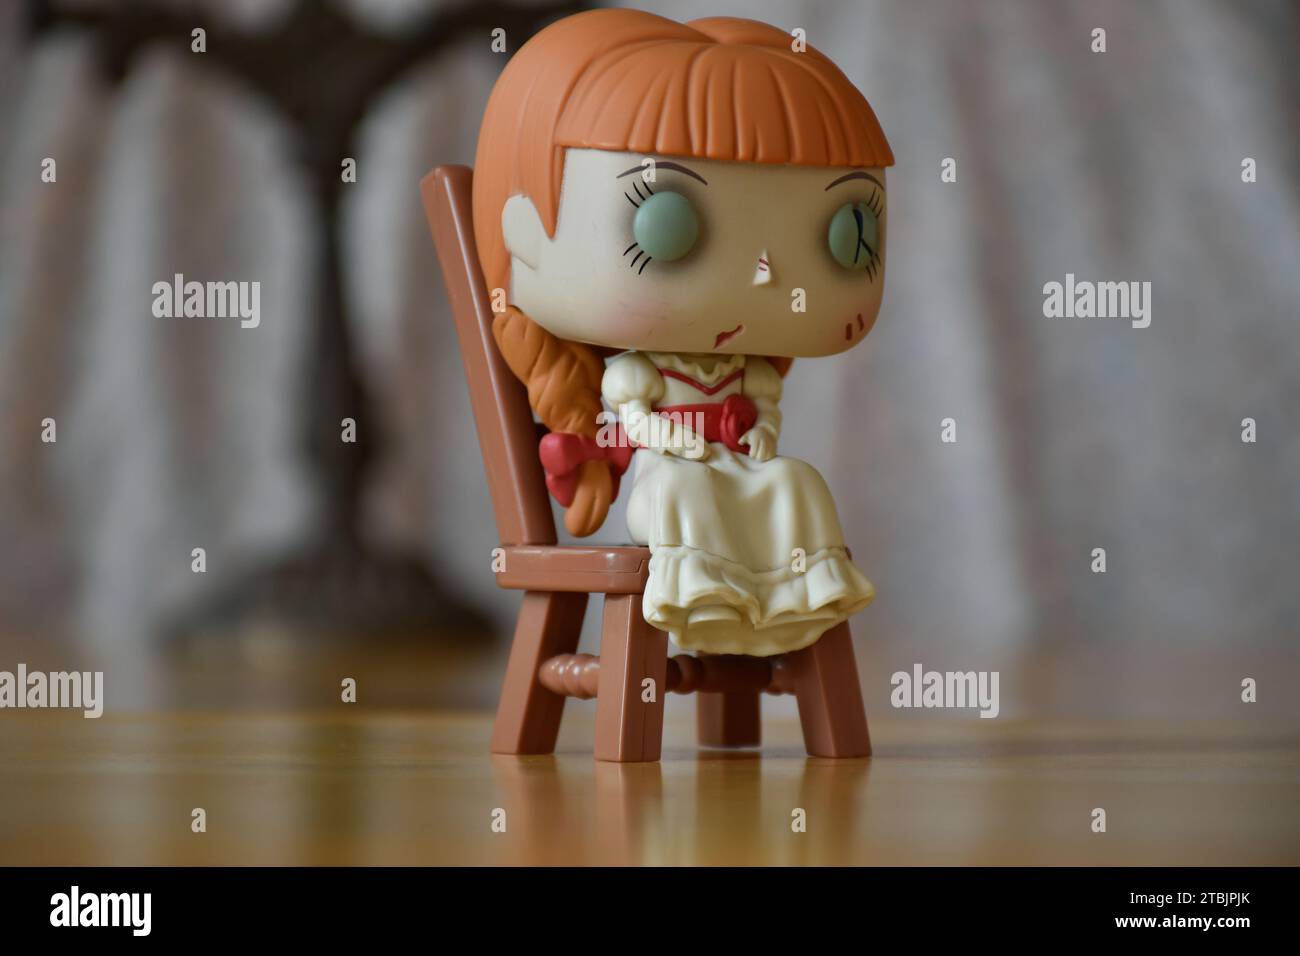 Funko Pop action figure of  haunted doll Annabelle from The Conjuring supernatural horror films. Vintage interior, dark room, old candlestick. Stock Photo